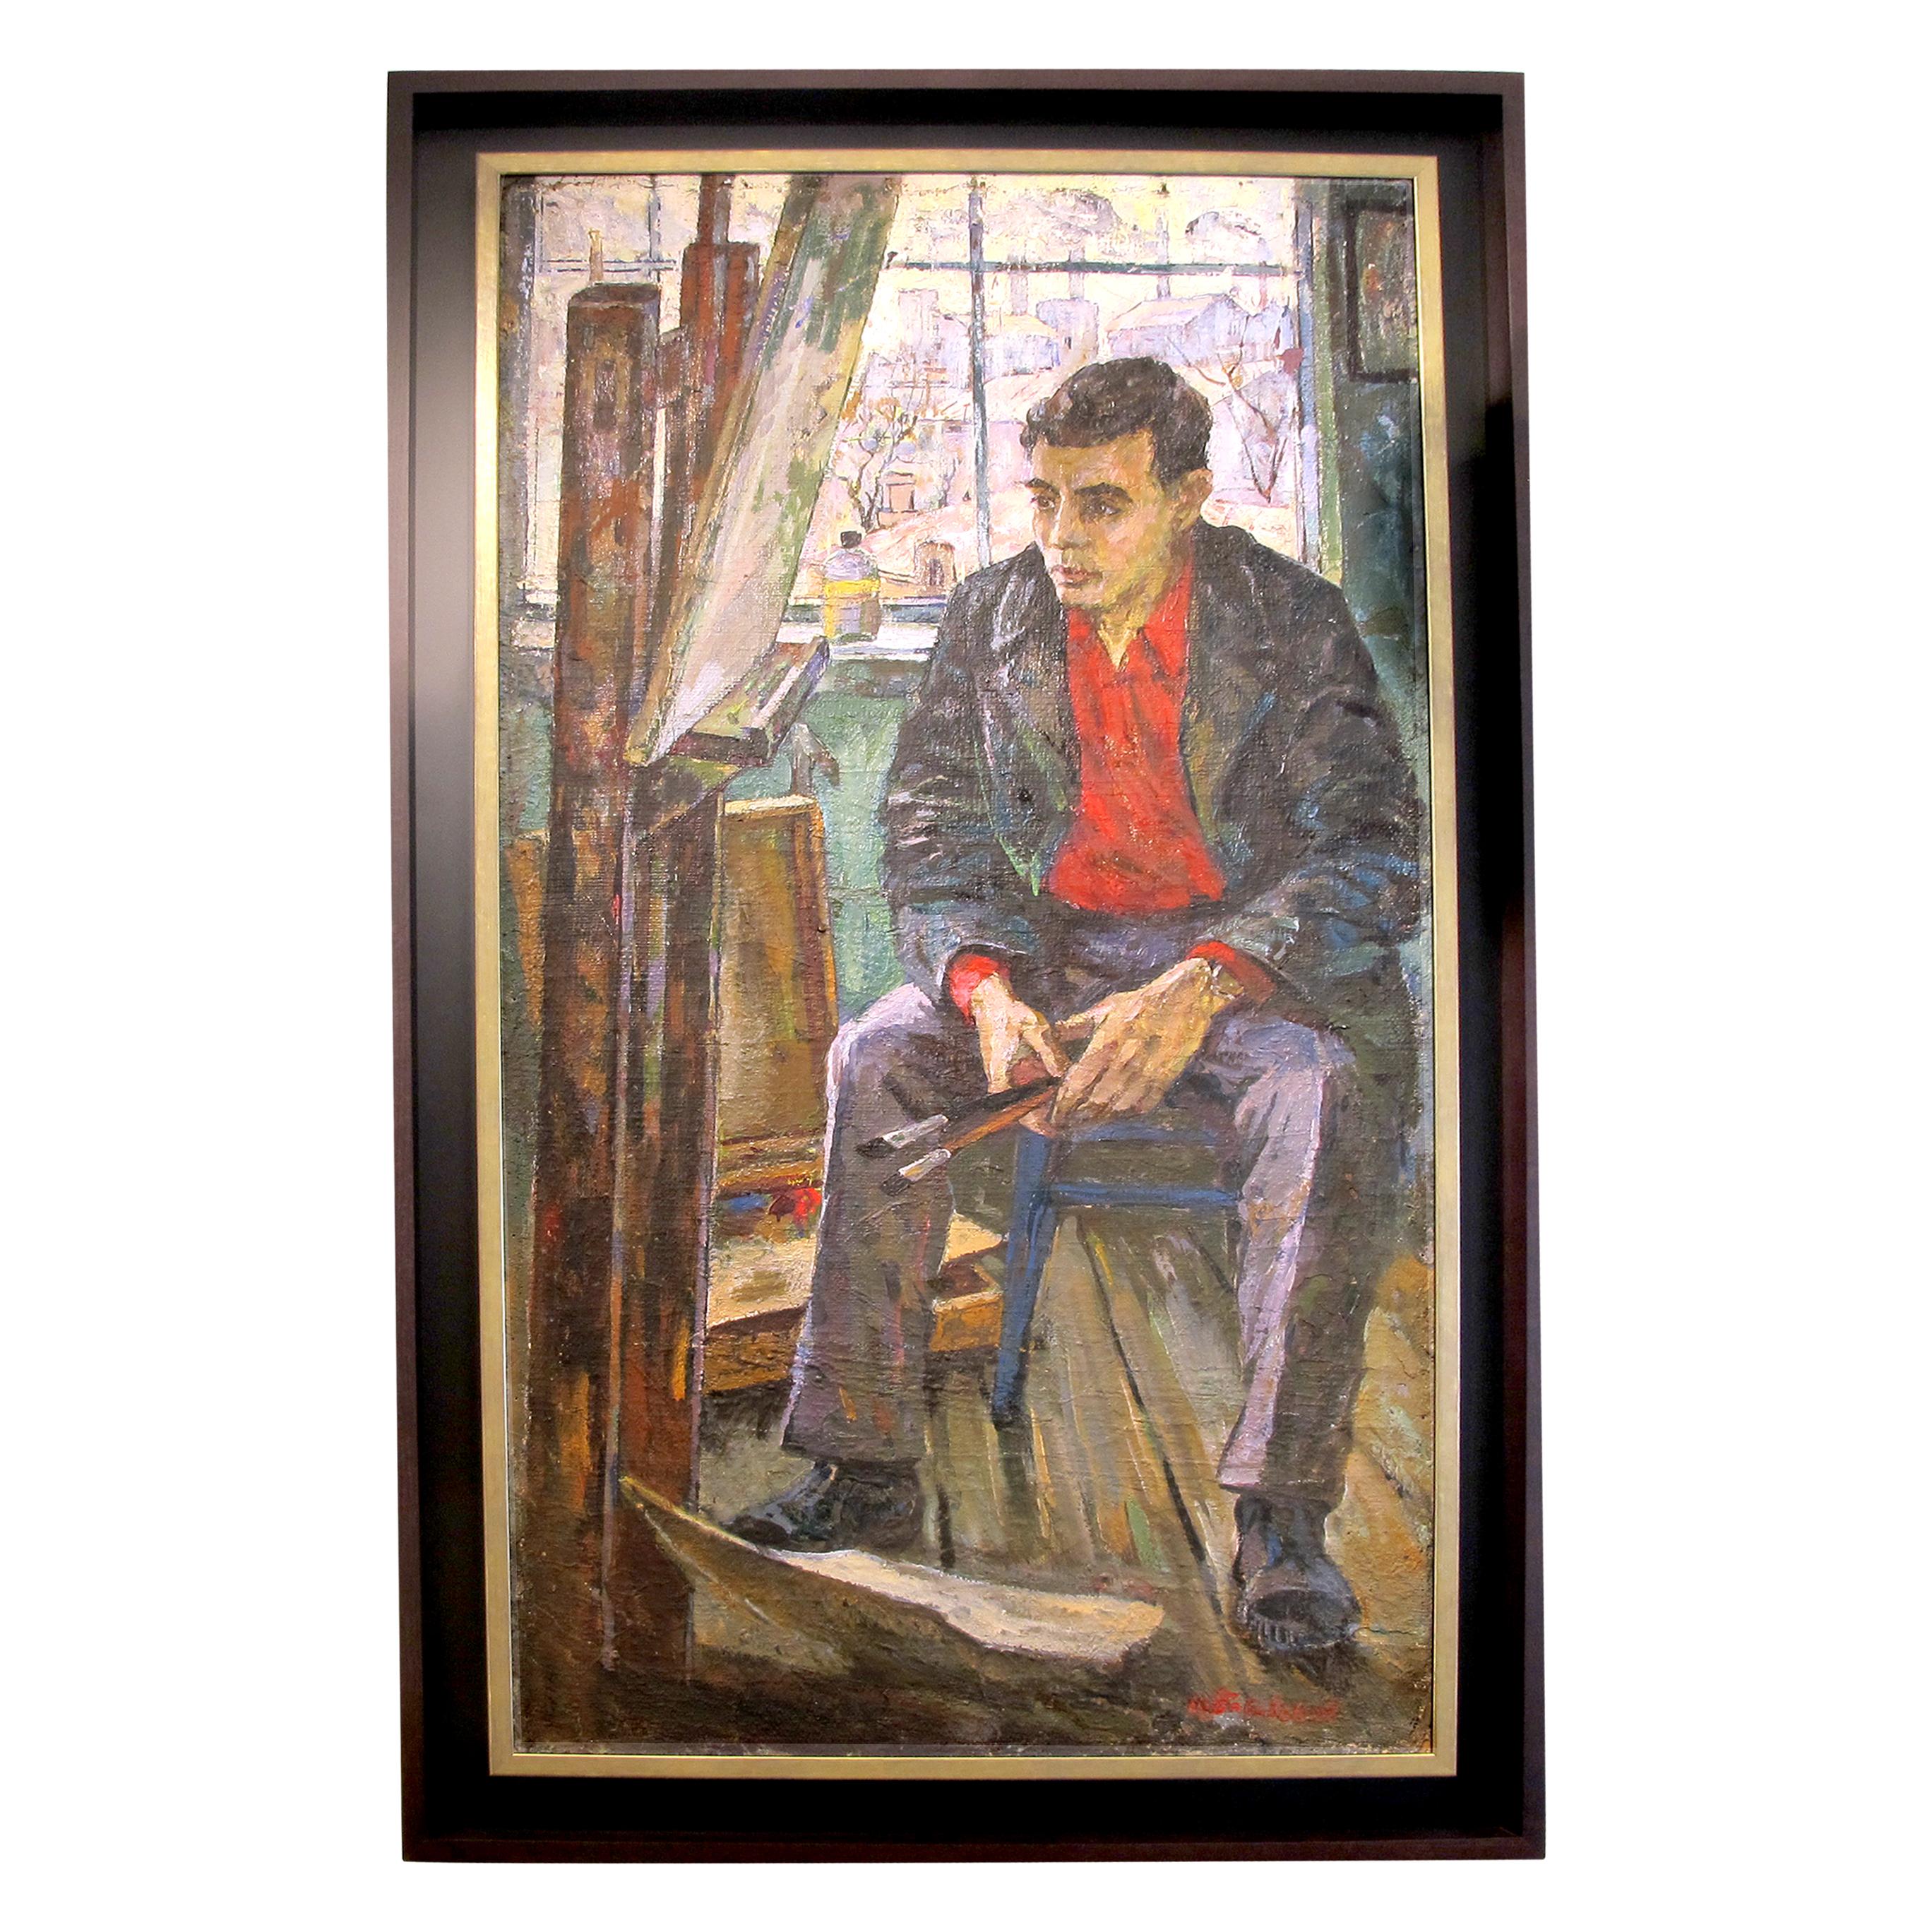 The focal point of the painting is the artist himself, sitting confidently before his Chevalet - an iconic wooden easel - as he diligently works on a new masterpiece. Dressed in a vibrant red shirt, the artist's presence effortlessly draws the